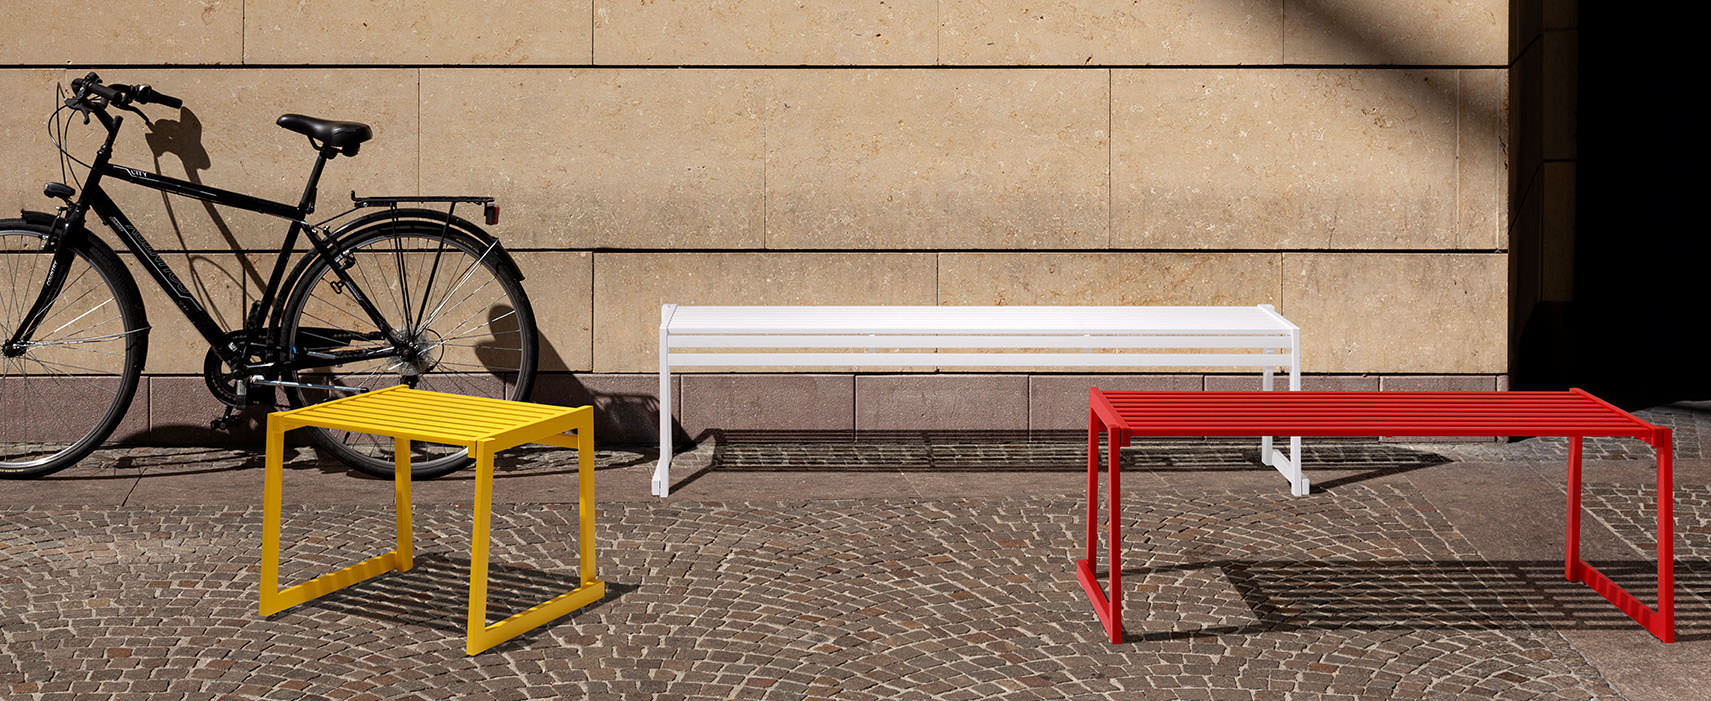 Streetscape benches in 3 sizes